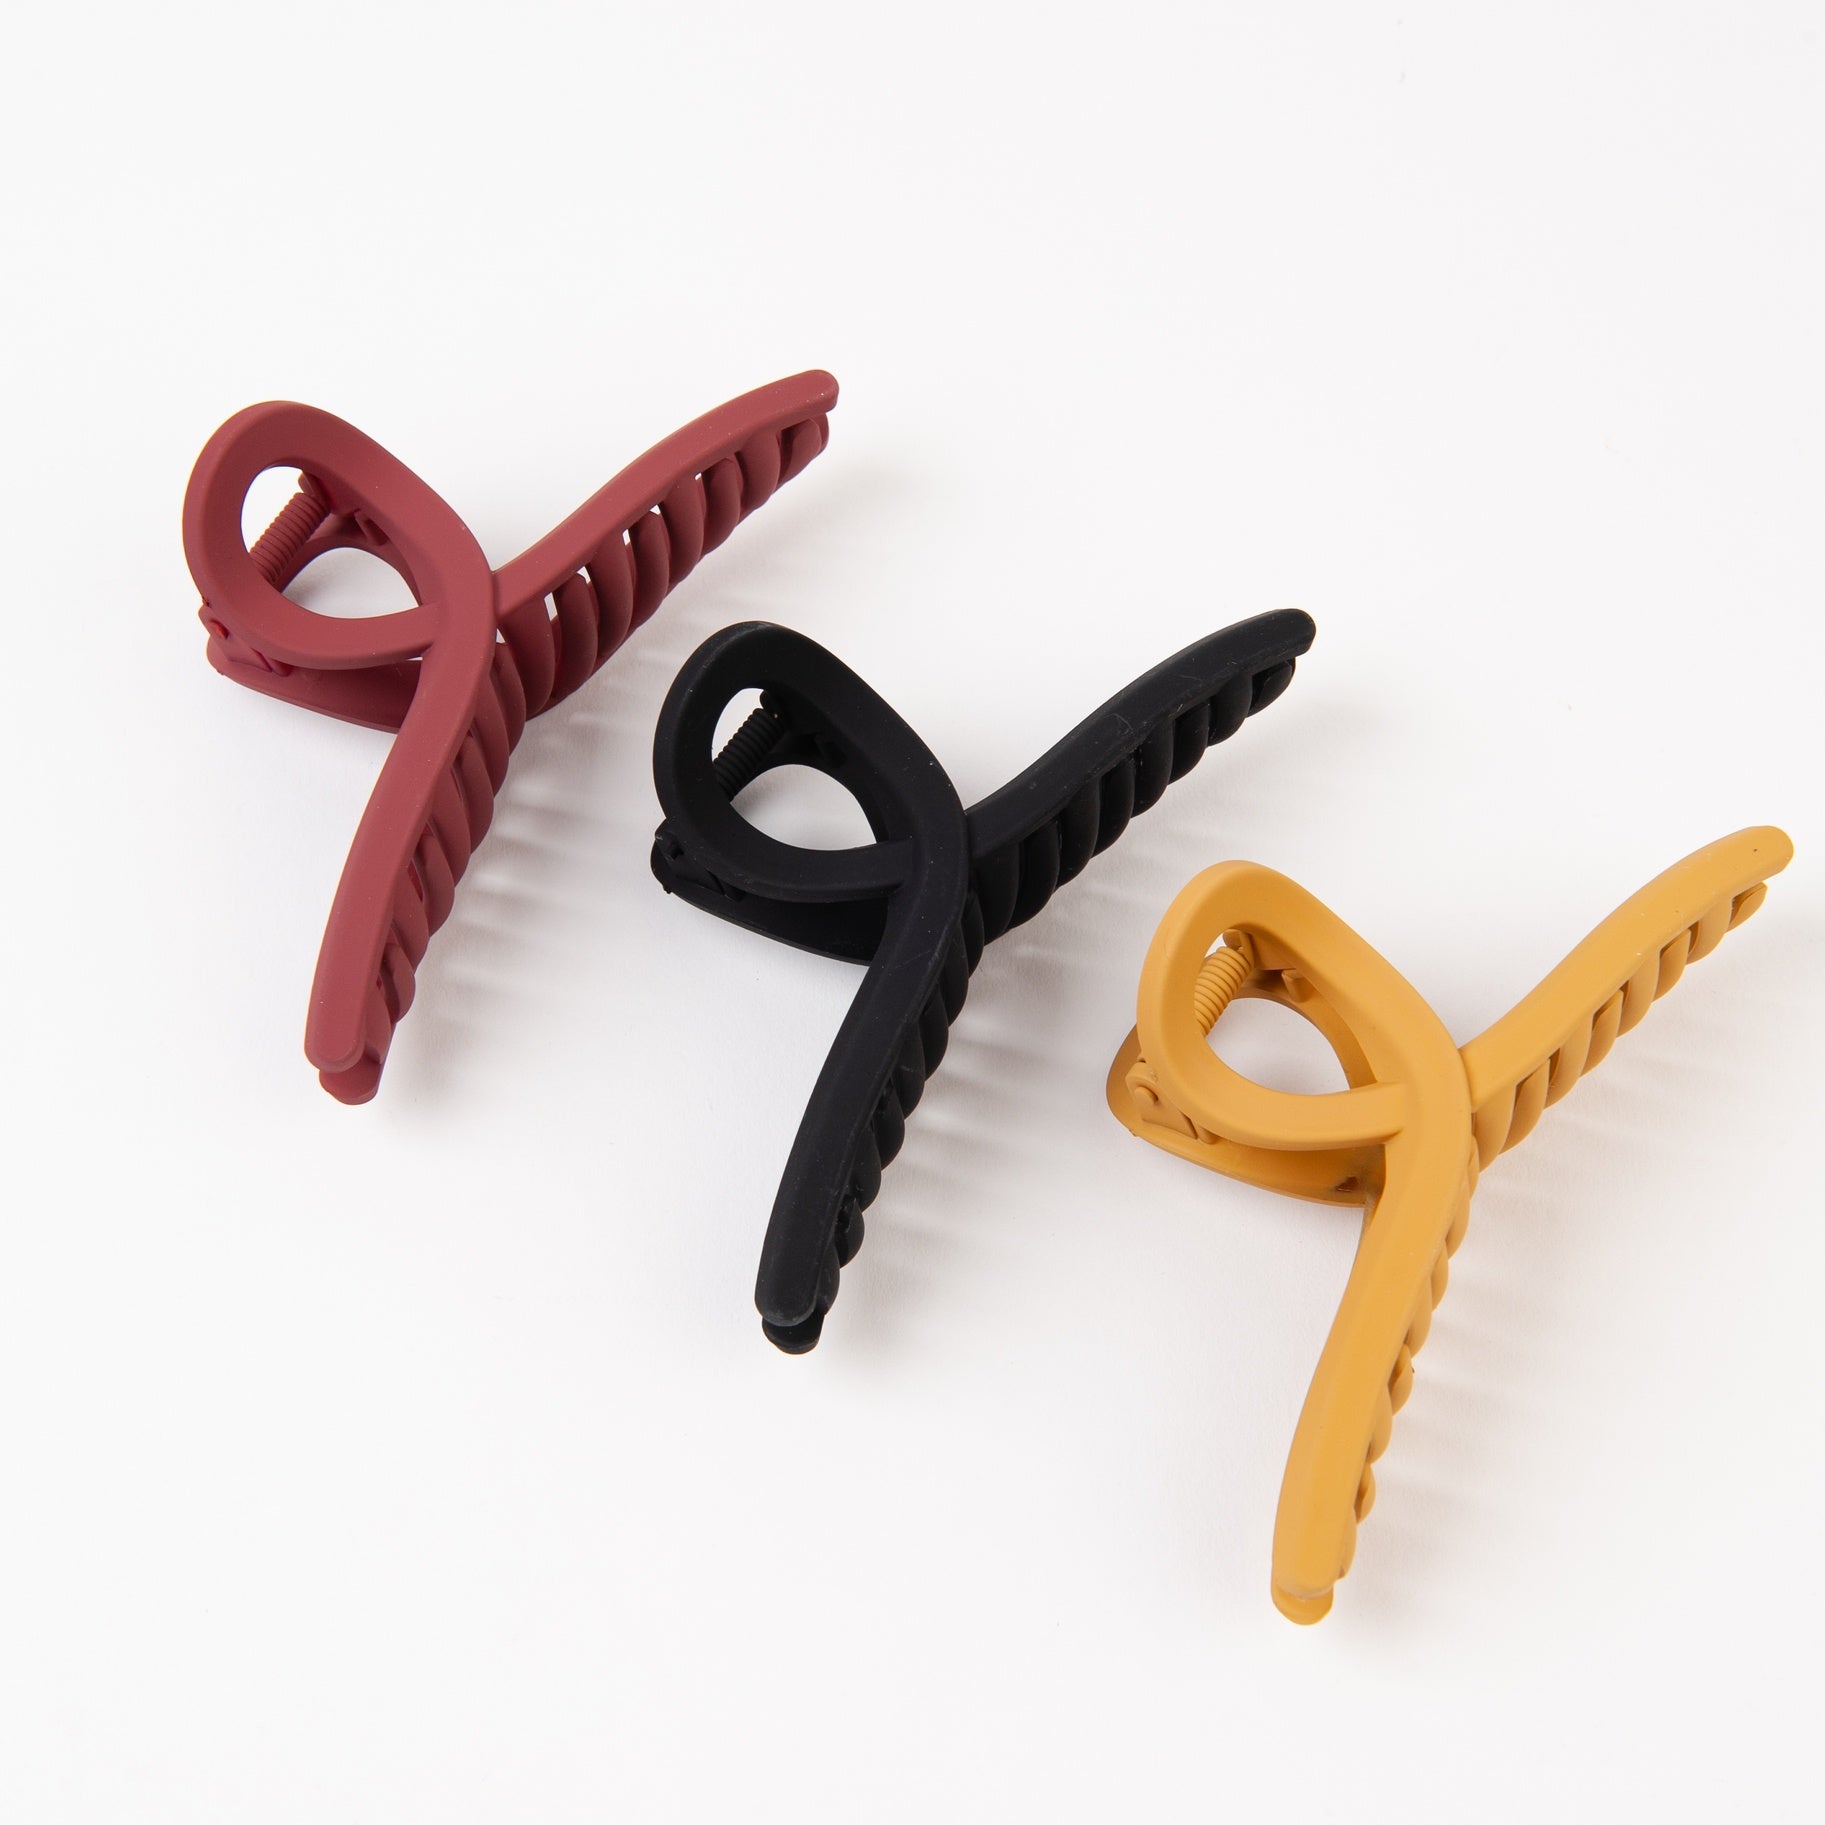 Hair Claw clip, with wide bottom and twisted loop top. Shown in three colors: Merlot/Rust, Black and Mustard Yellow.